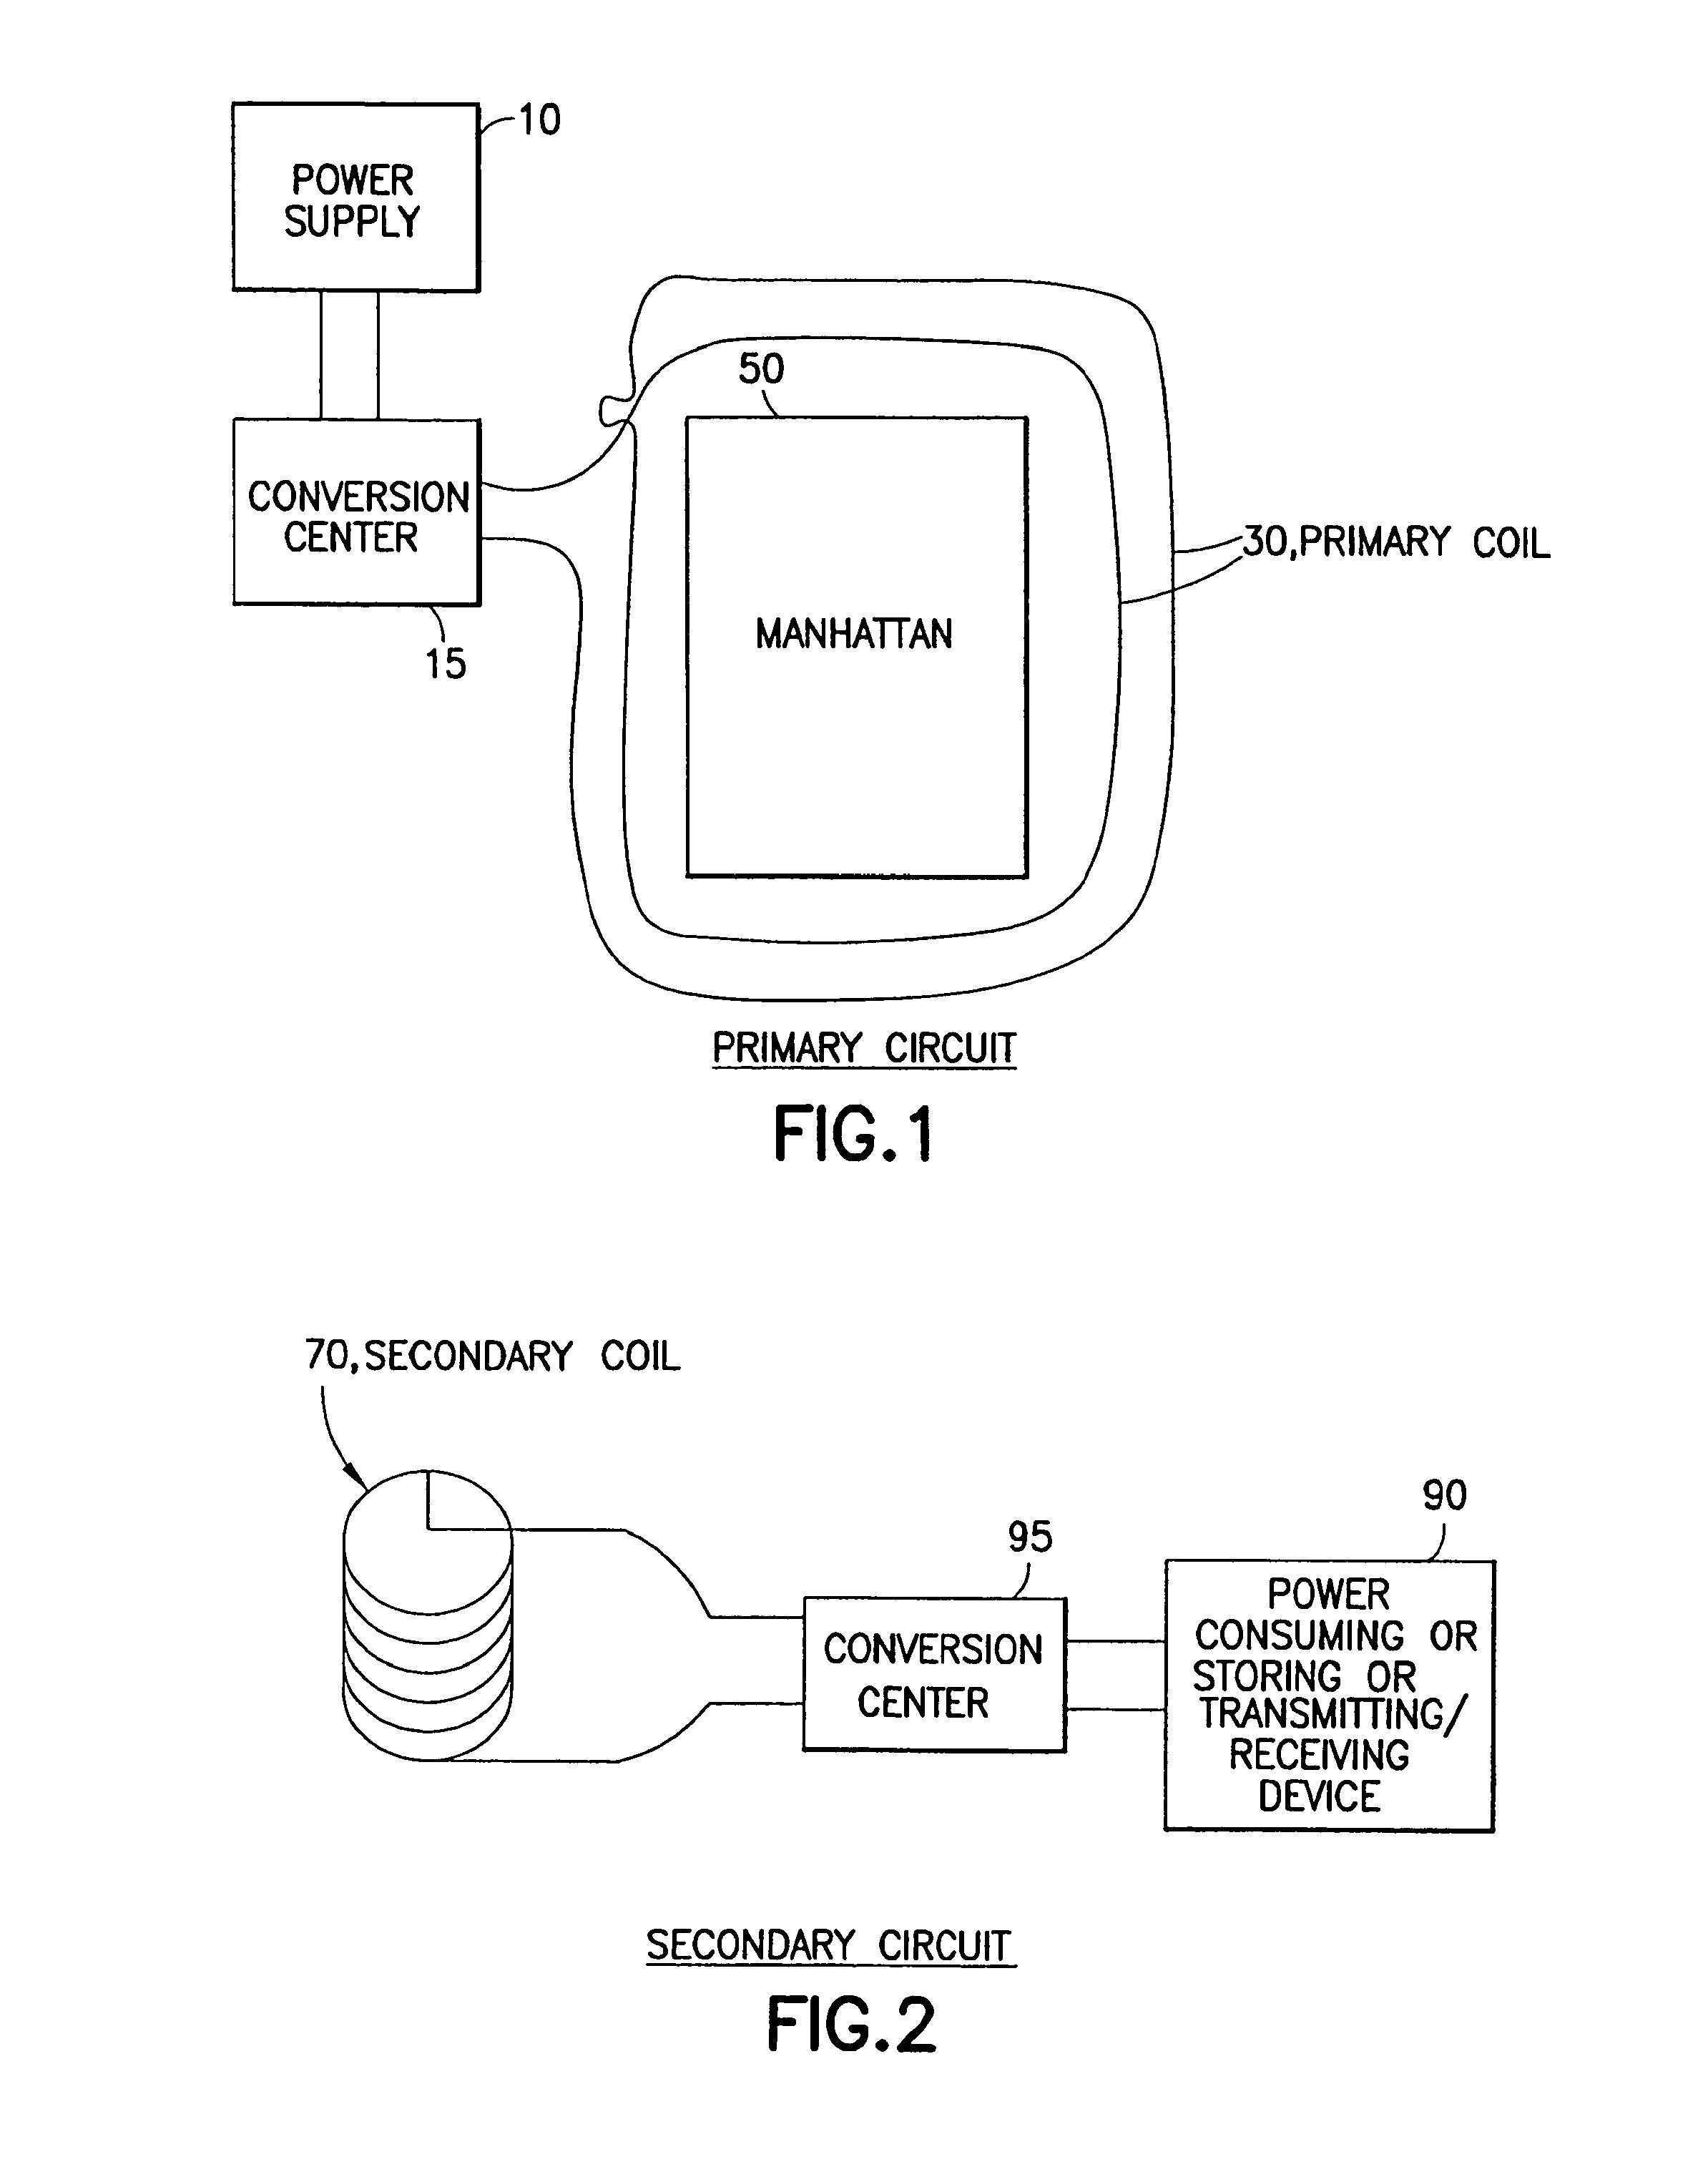 Self-charging electric vehicles and aircraft, and wireless energy distribution system